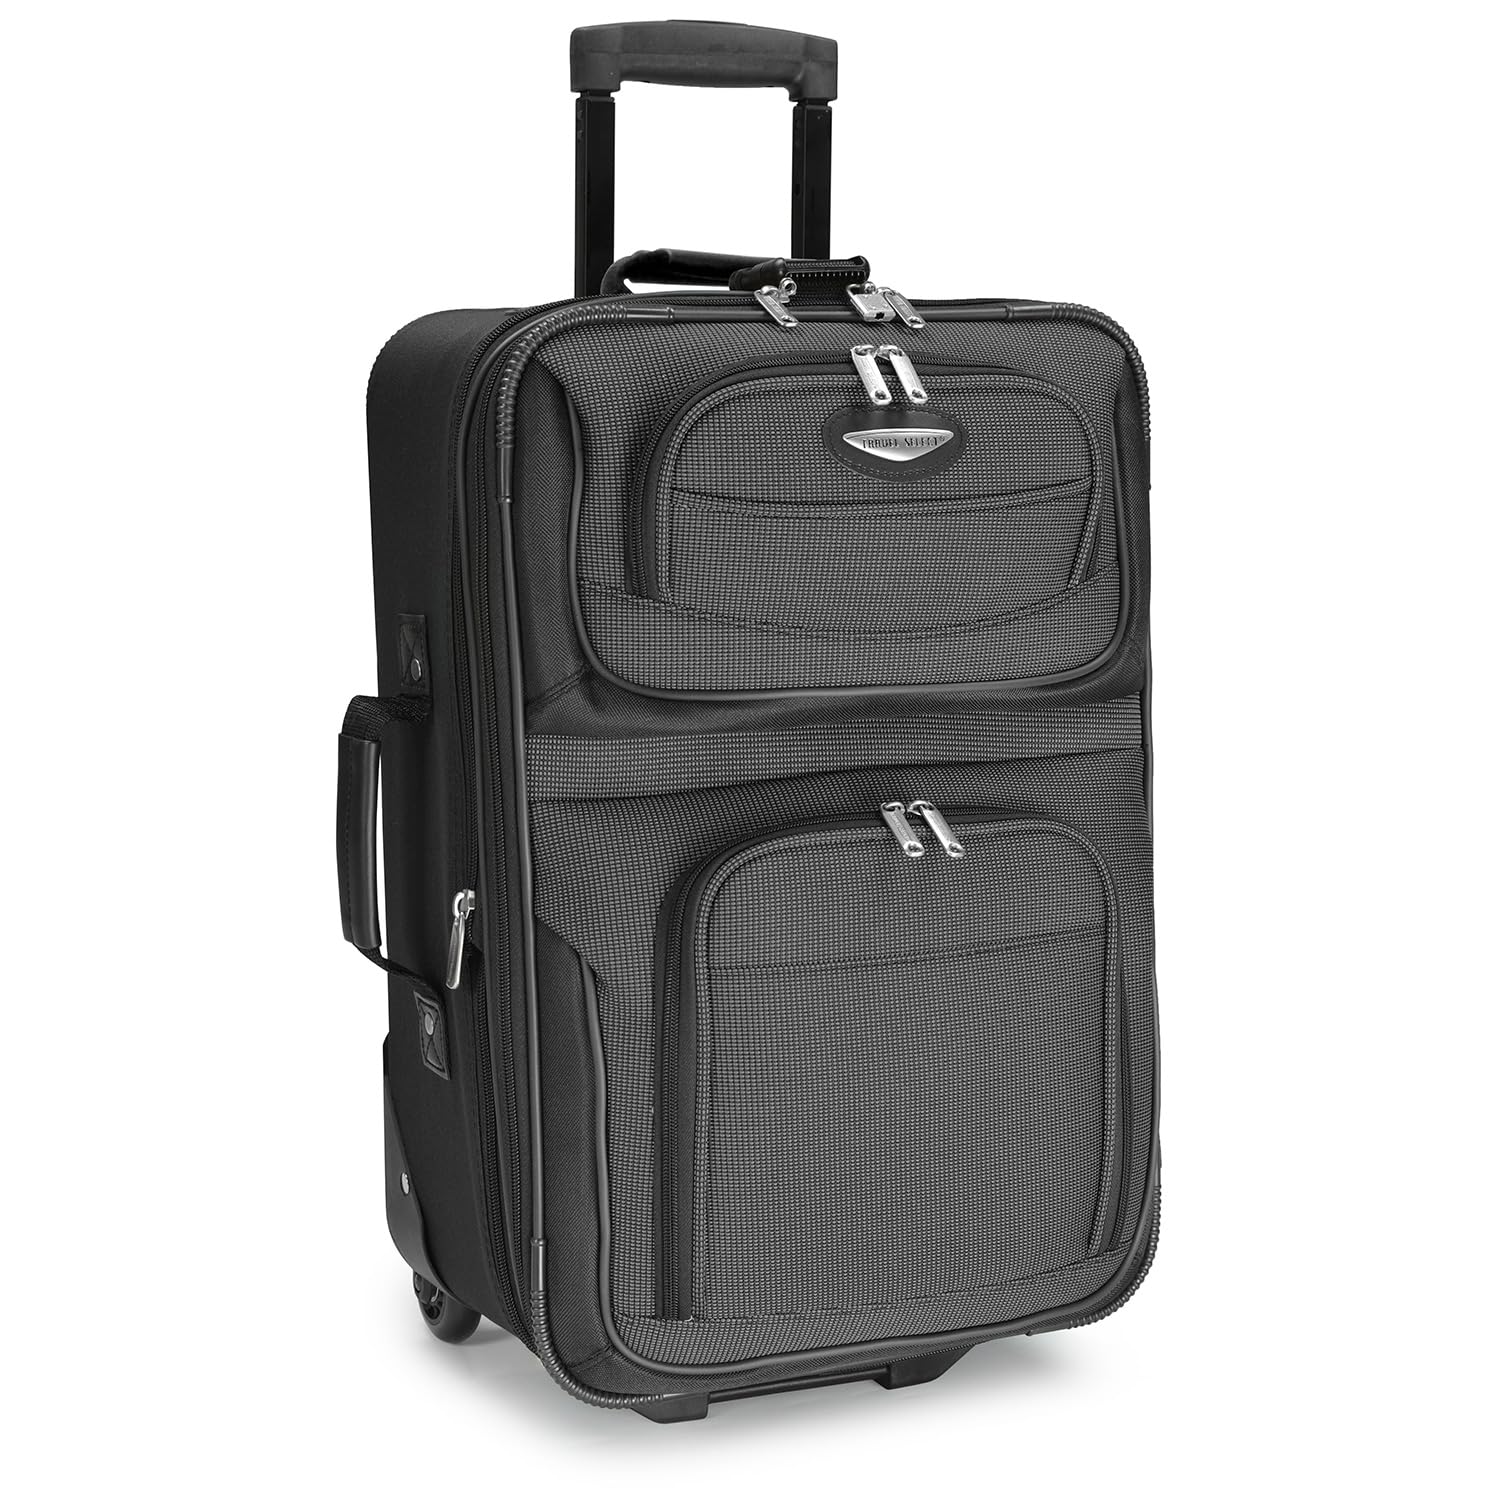 Travel Select Amsterdam Softside Expandable Rolling Luggage, TSA-Approved, Lightweight, Gray, Carry-on 21-Inch